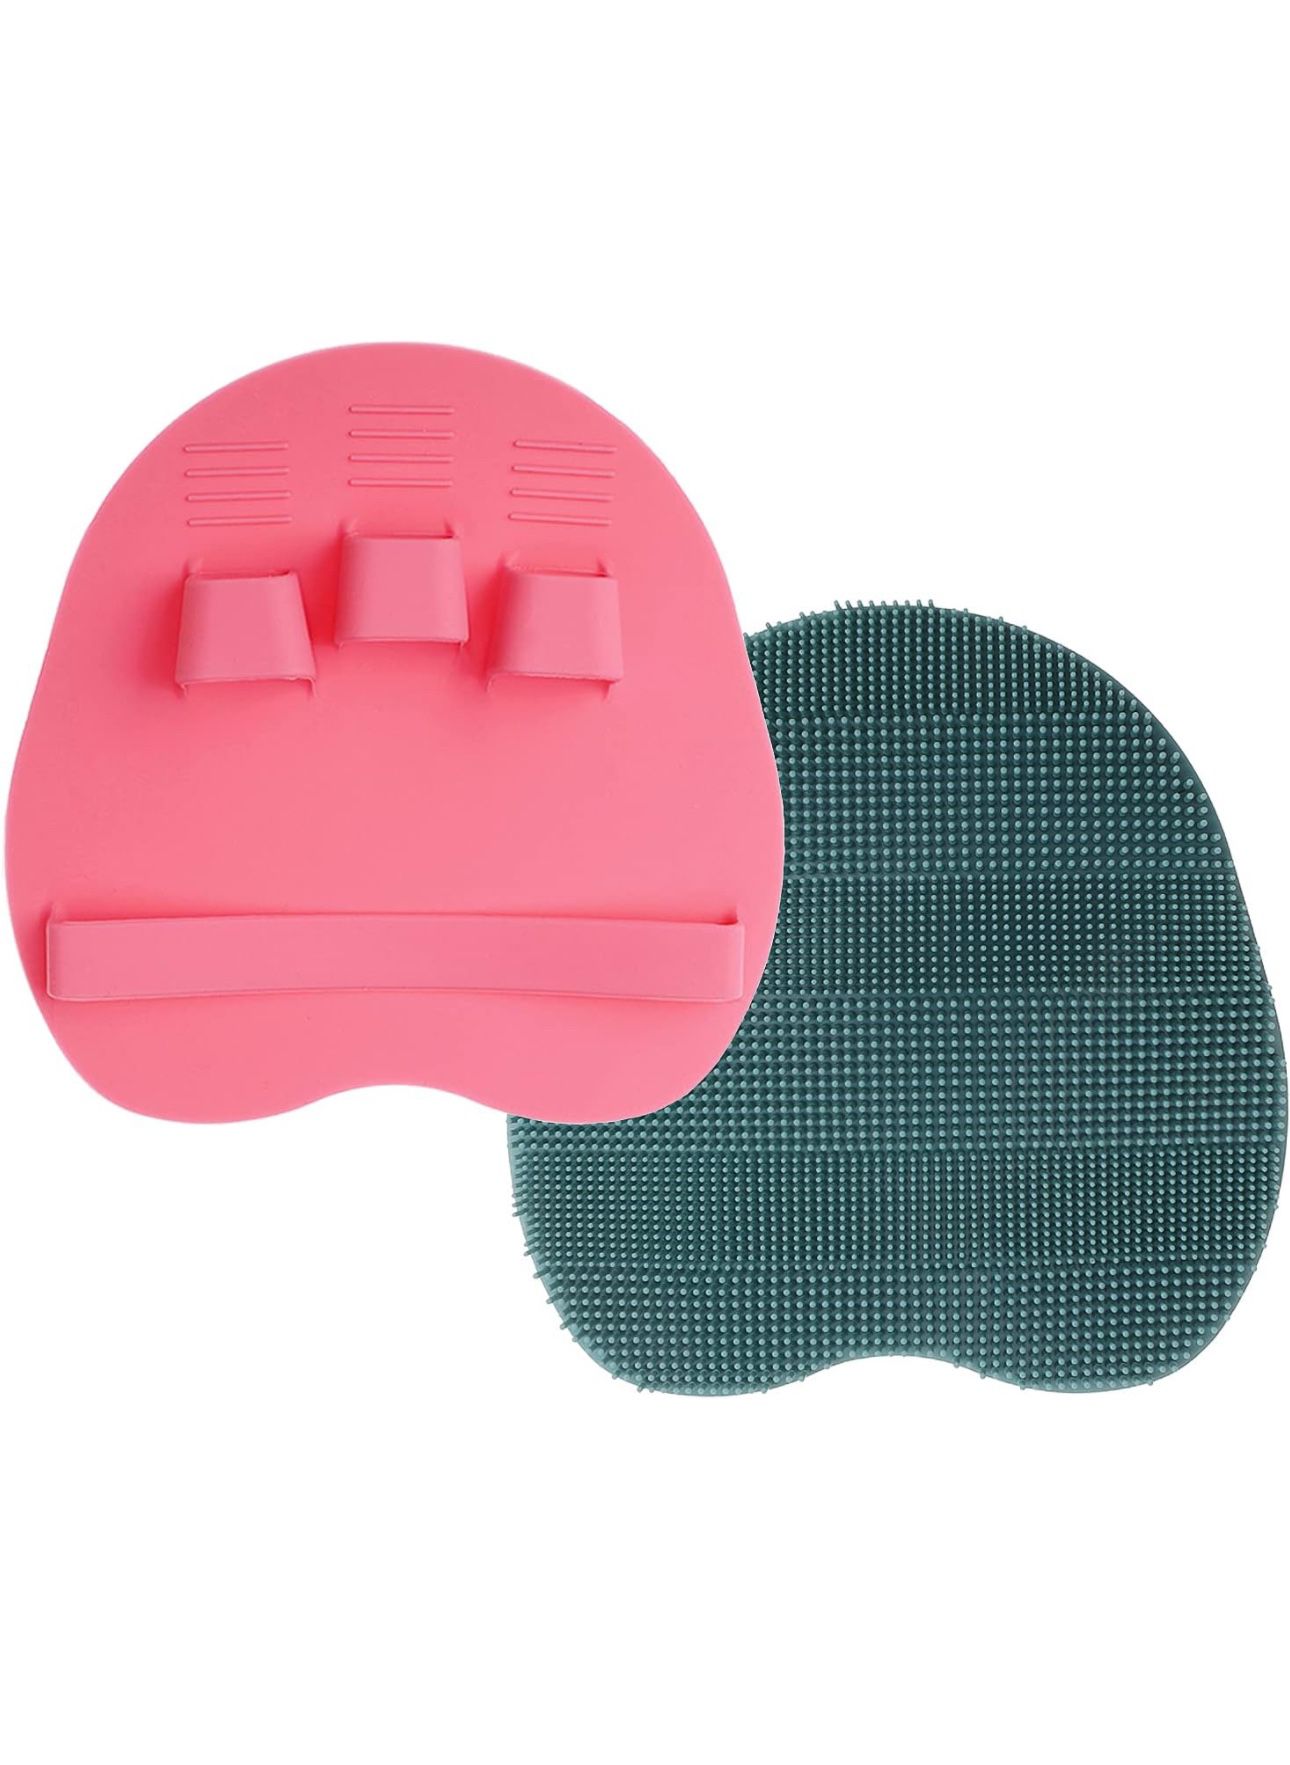 2 Pack Soft Silicone Shower Brush, Body & Face & Short Hair Wash, Bath Exfoliating Skin Massage Scrubber, Dry Skin Brushing Glove Loofah, Fit for Sens